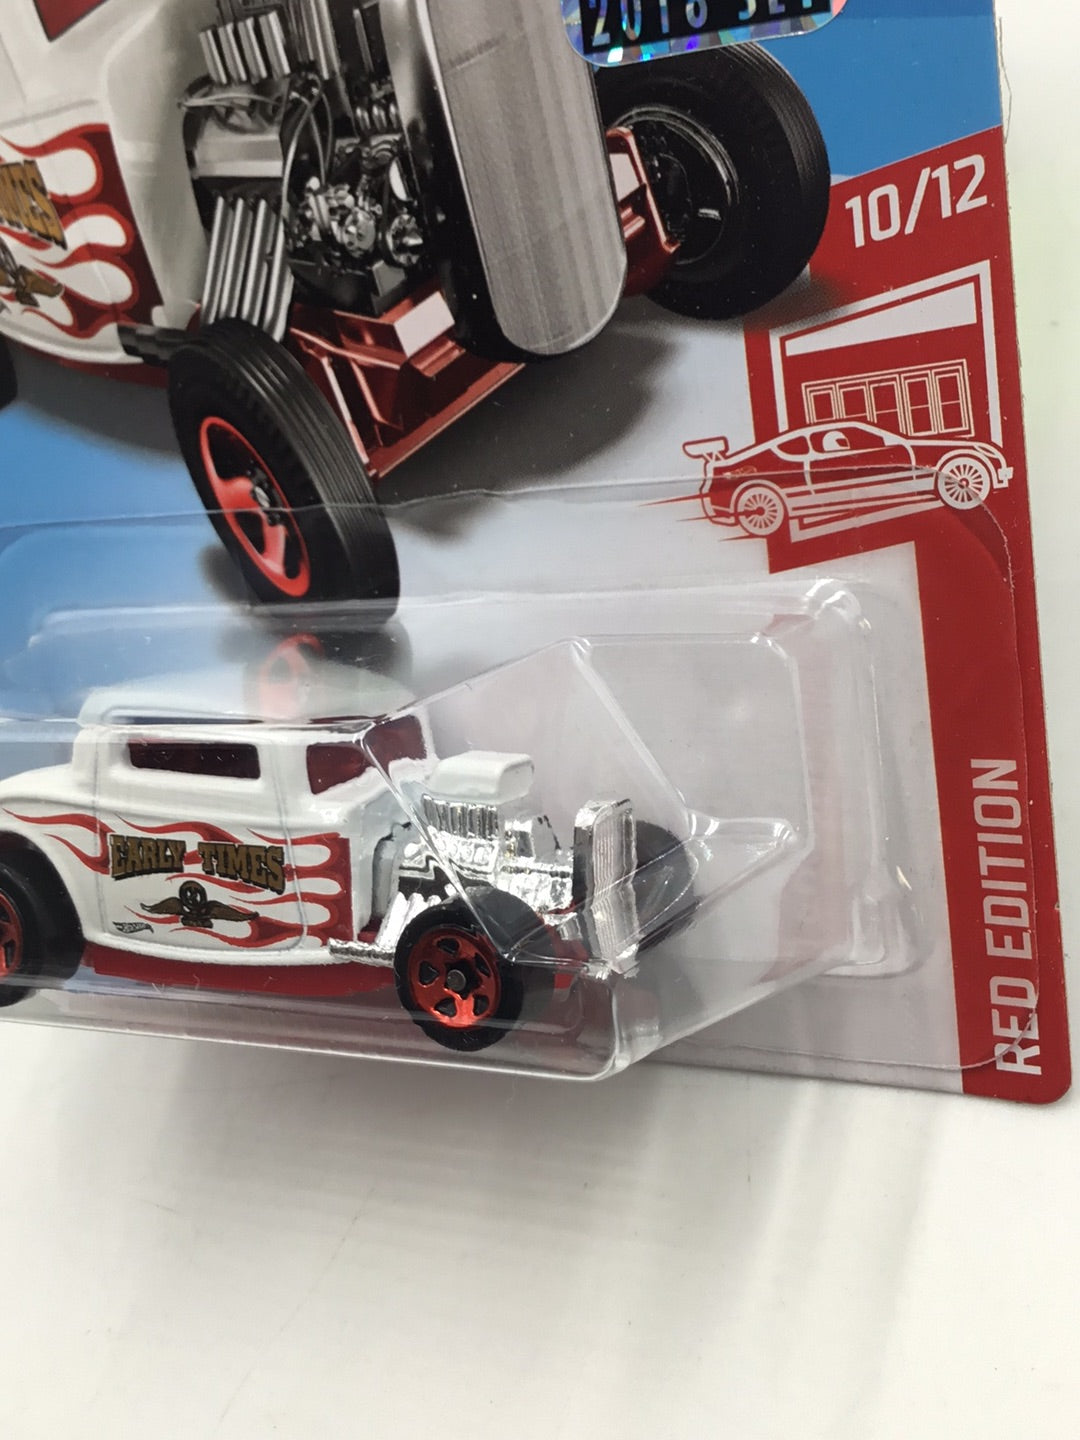 2018 hot wheels red edition #10 32 Ford target red factory sealed sticker